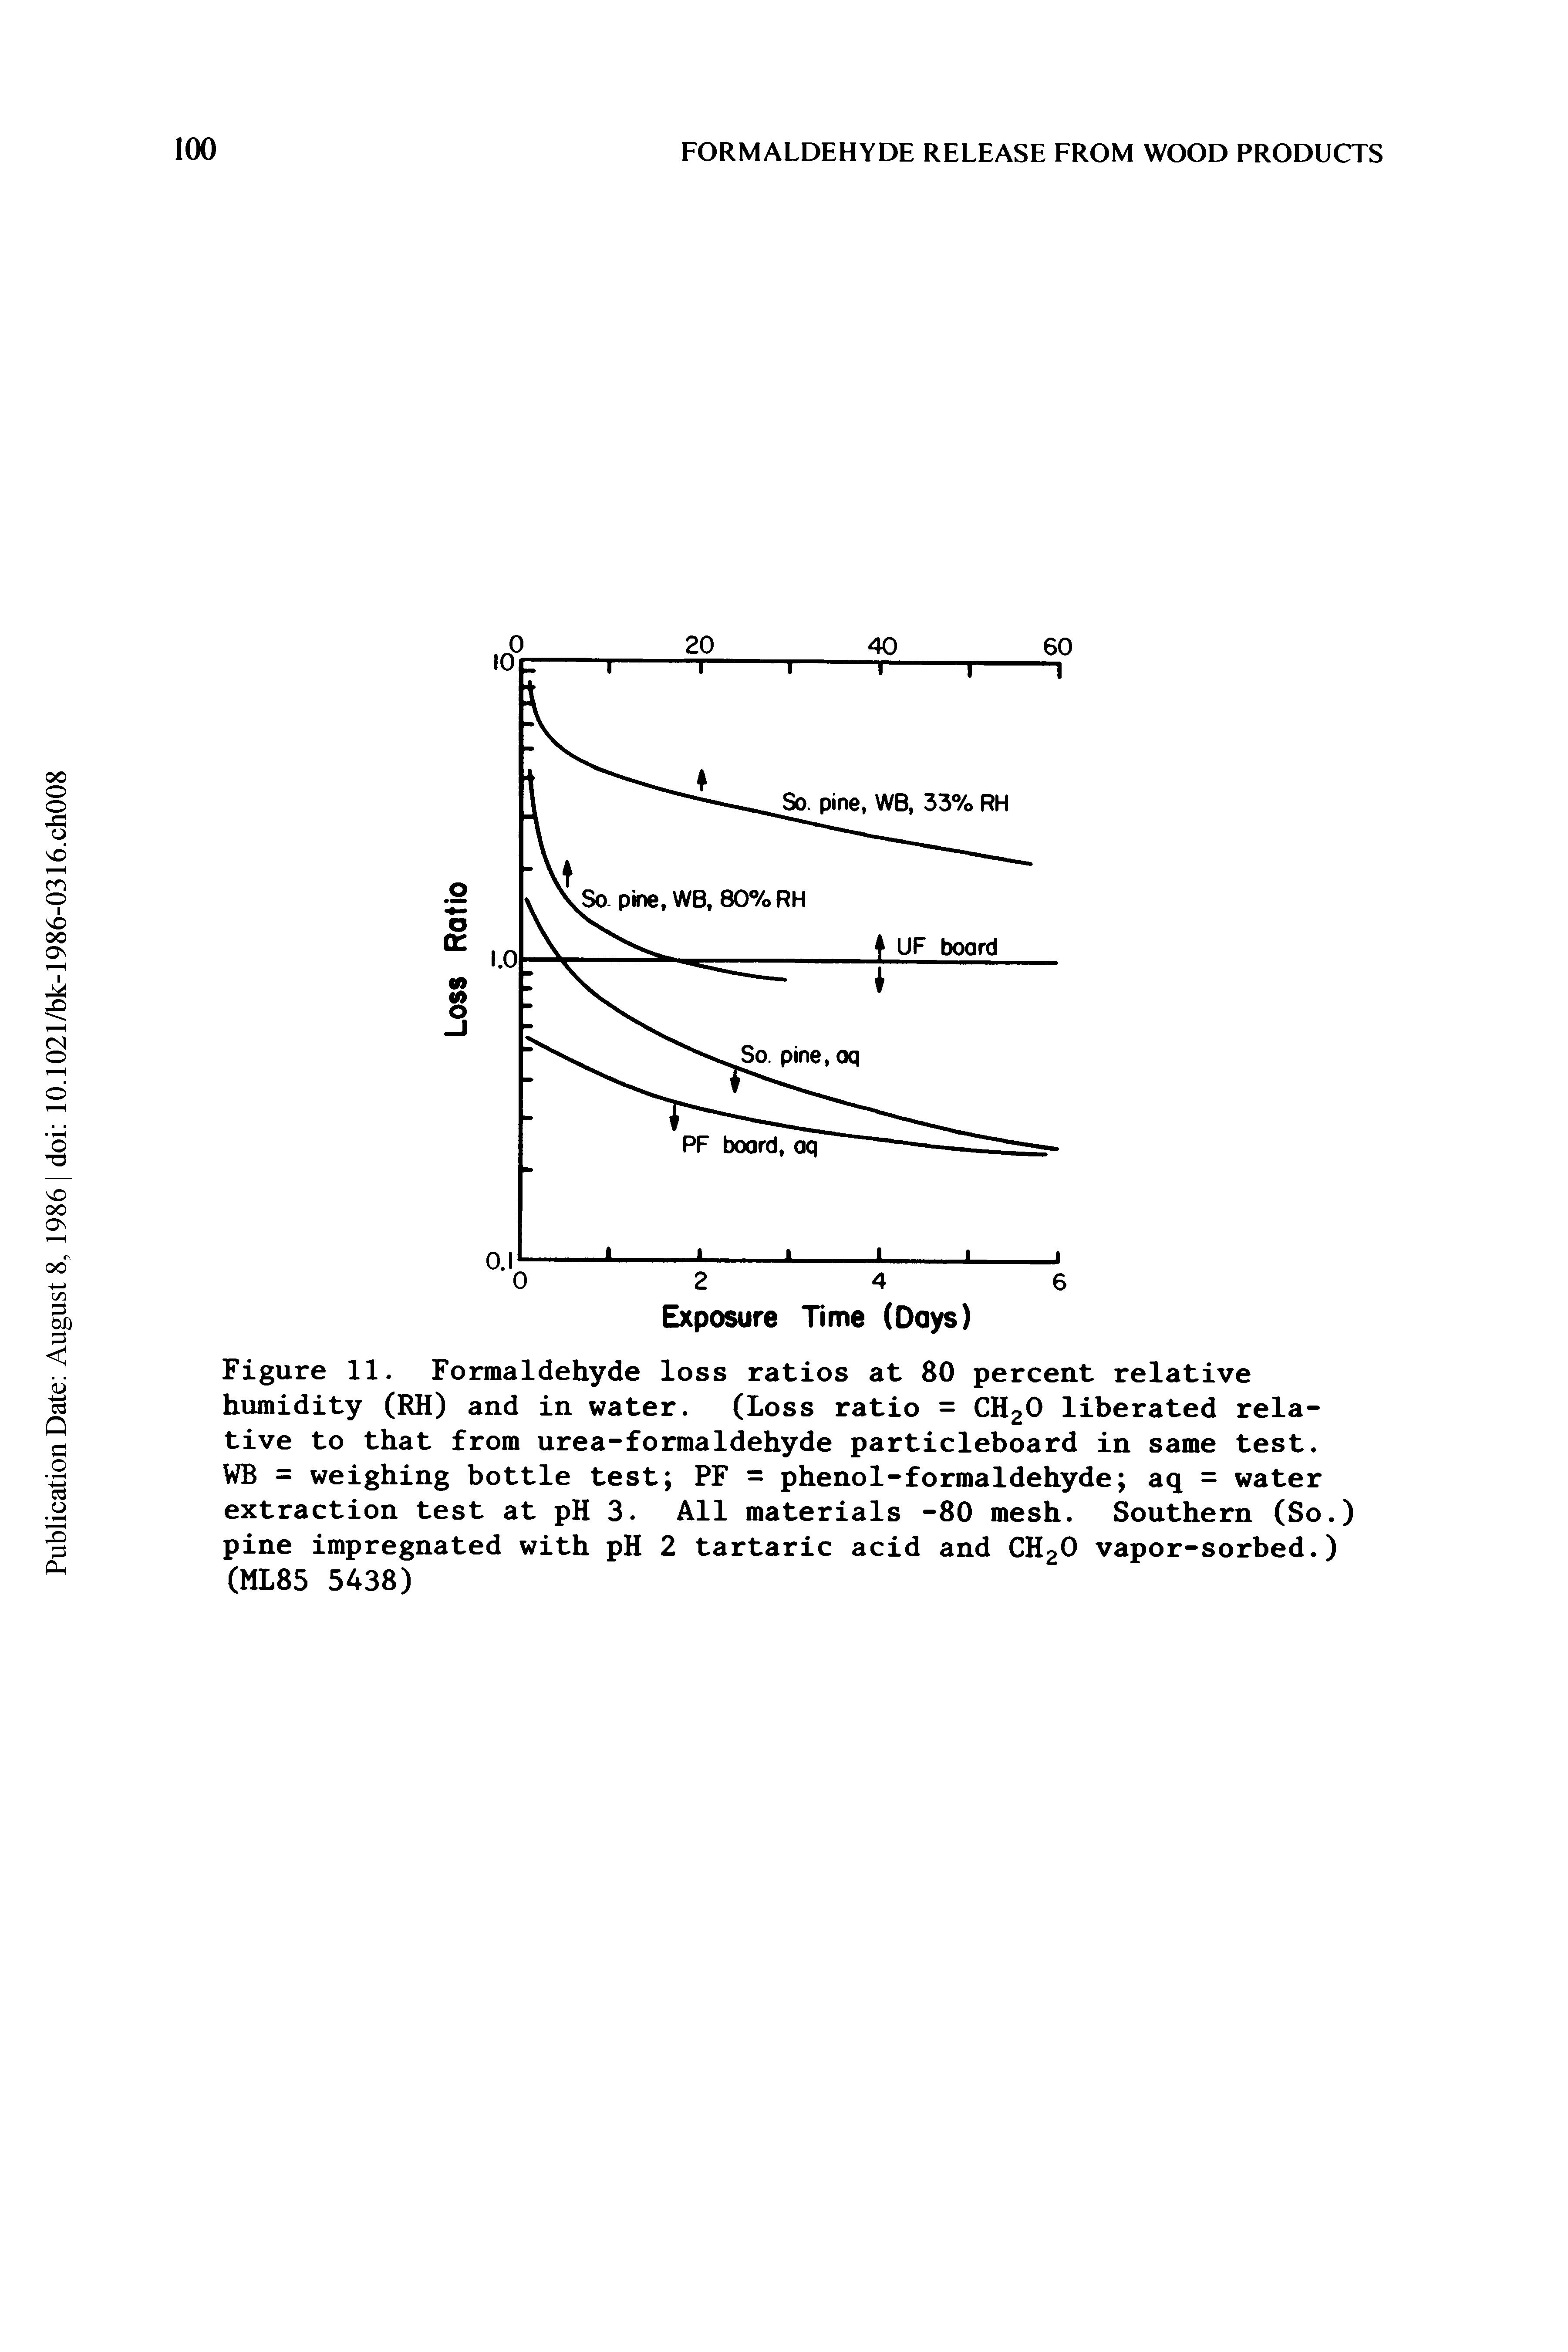 Figure 11. Formaldehyde loss ratios at 80 percent relative humidity (RH) and in water. (Loss ratio = CH2O liberated relative to that from urea-formaldehyde particleboard in same test.